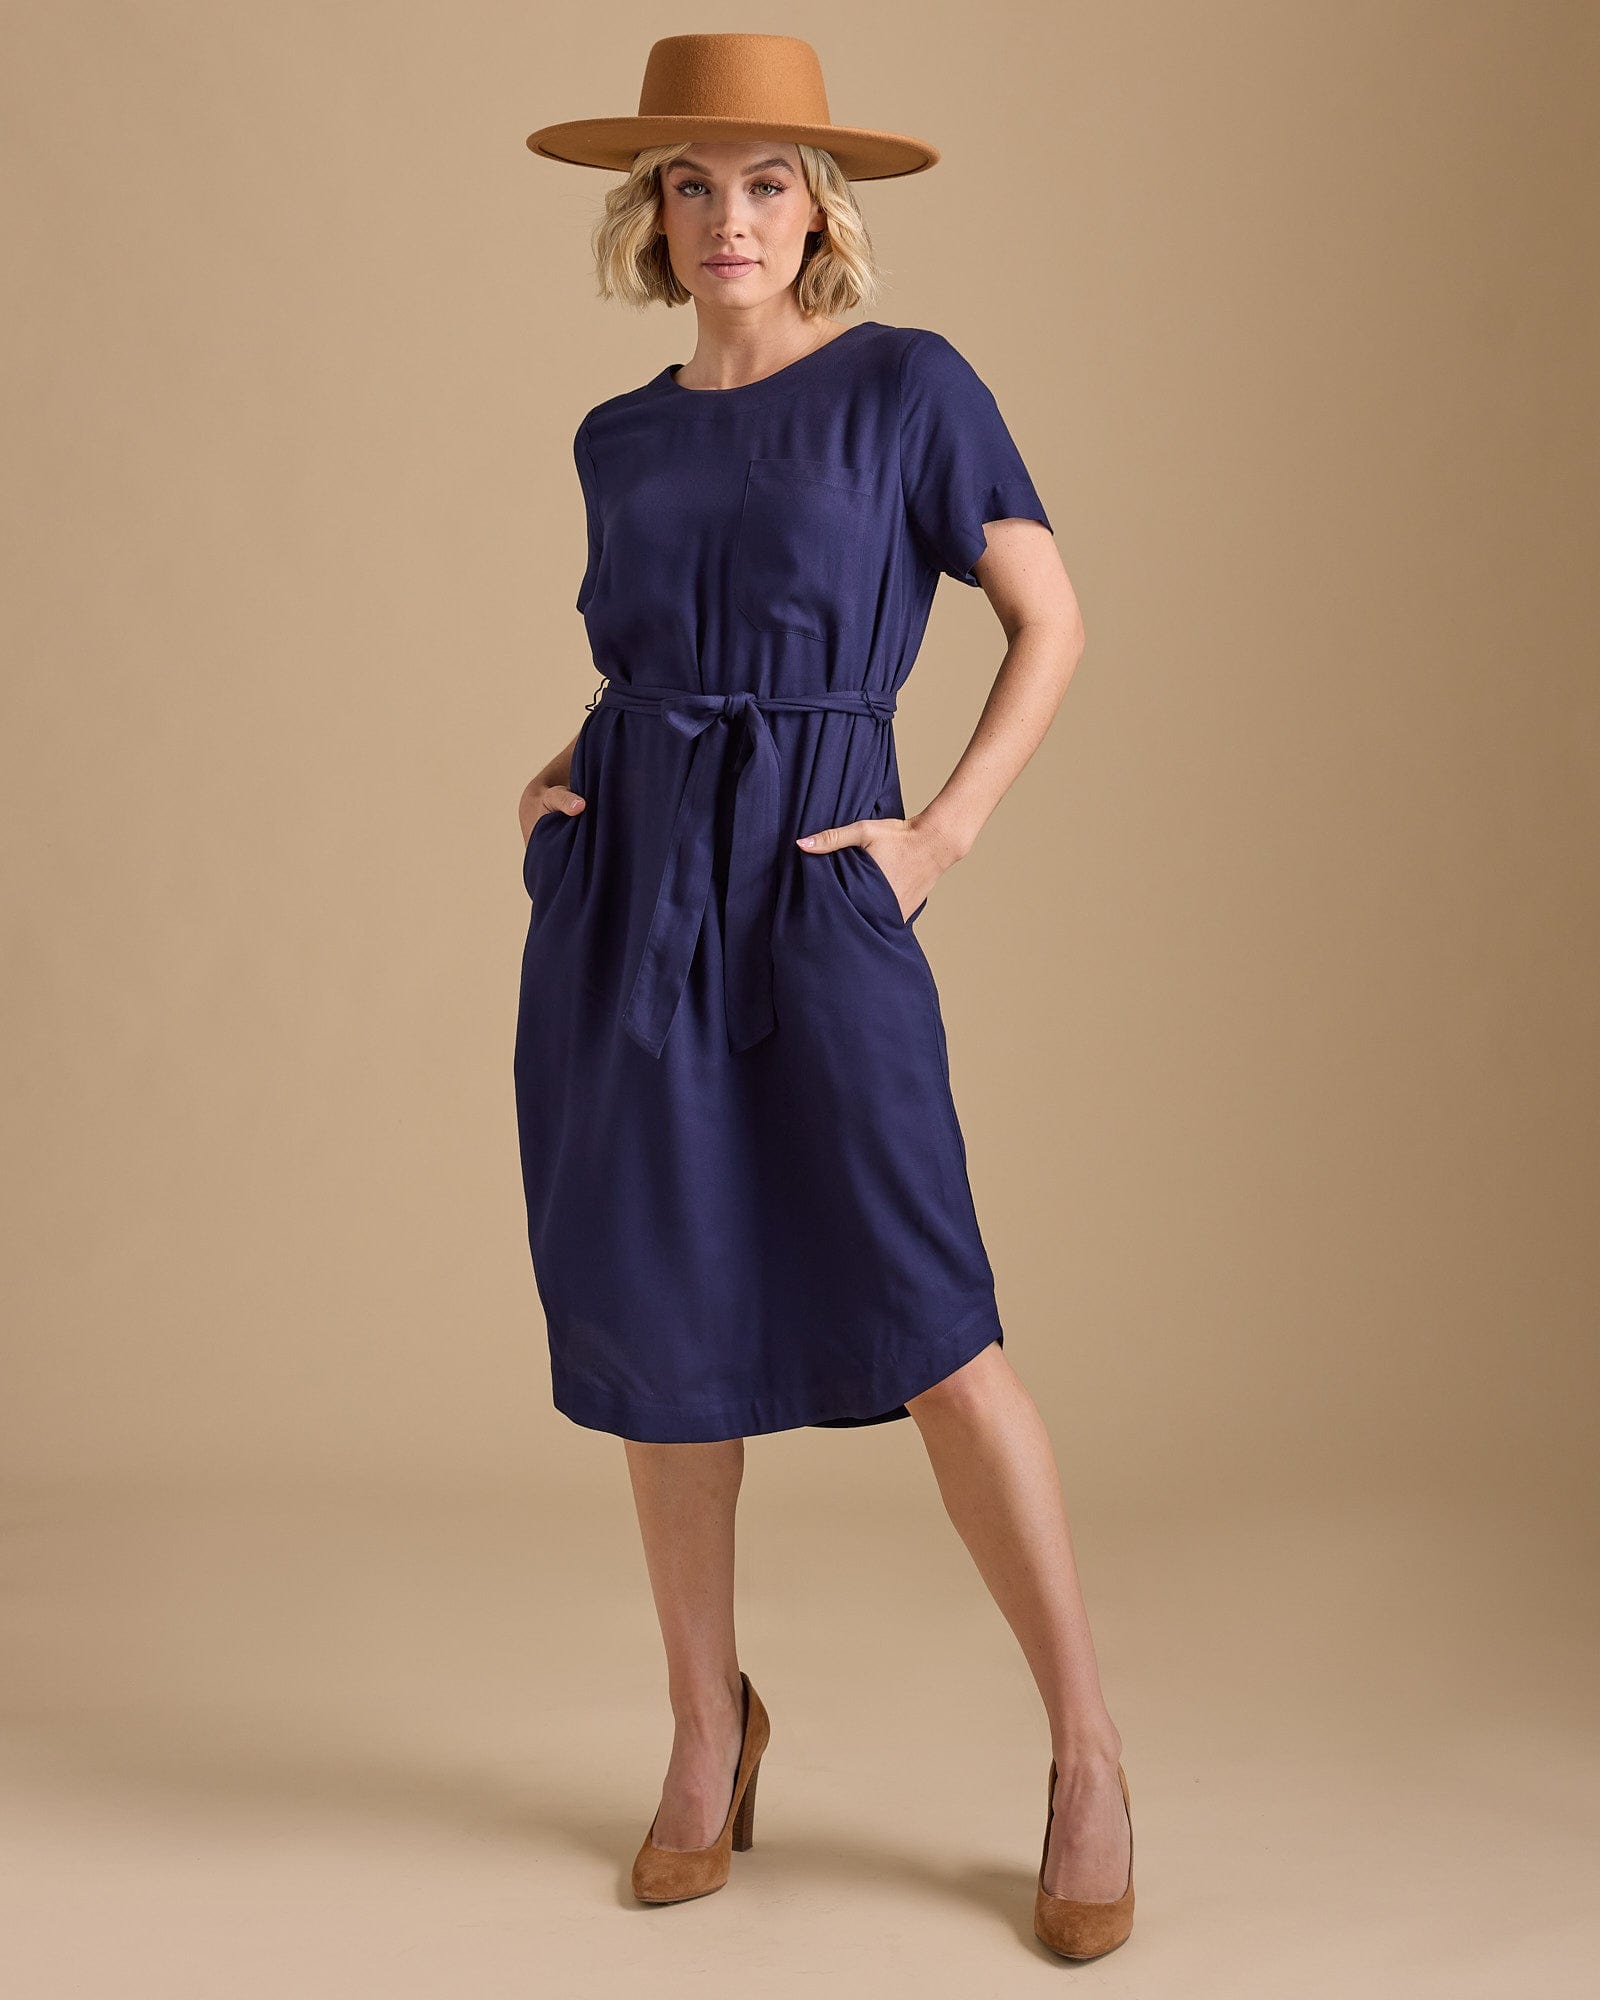 Woman in a short sleeve, knee-length navy dress with a tie at waist